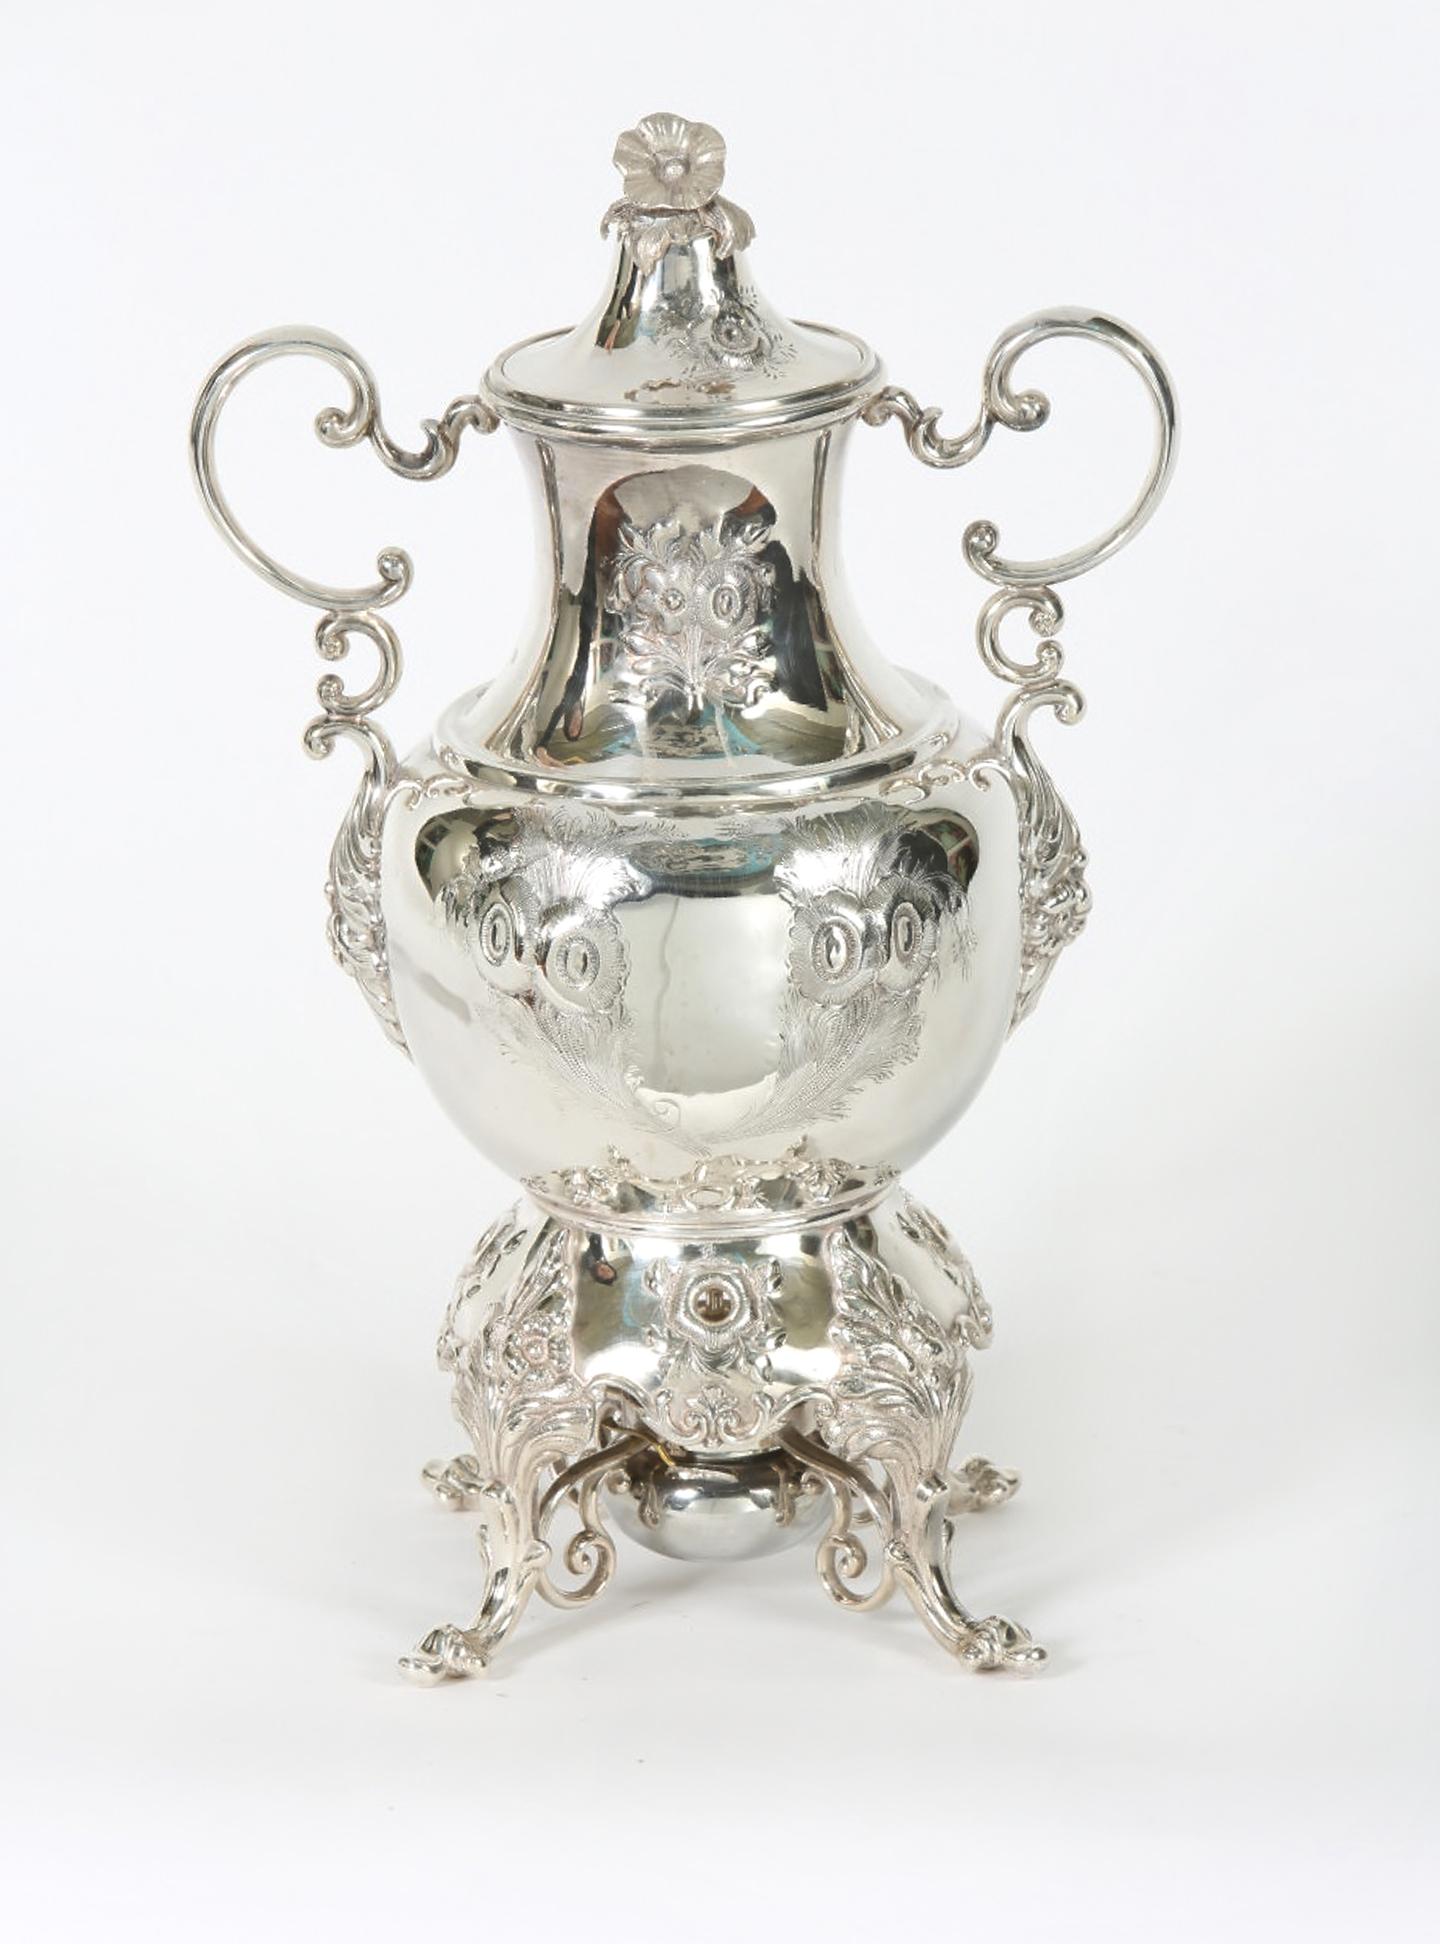 Early 20th century English silver plated footed hot water samovar with exterior design details / flame burner. The samovar is in excellent antique condition. Minor wear consistent with age / use. Maker's mark undersigned and numbered. The samovar